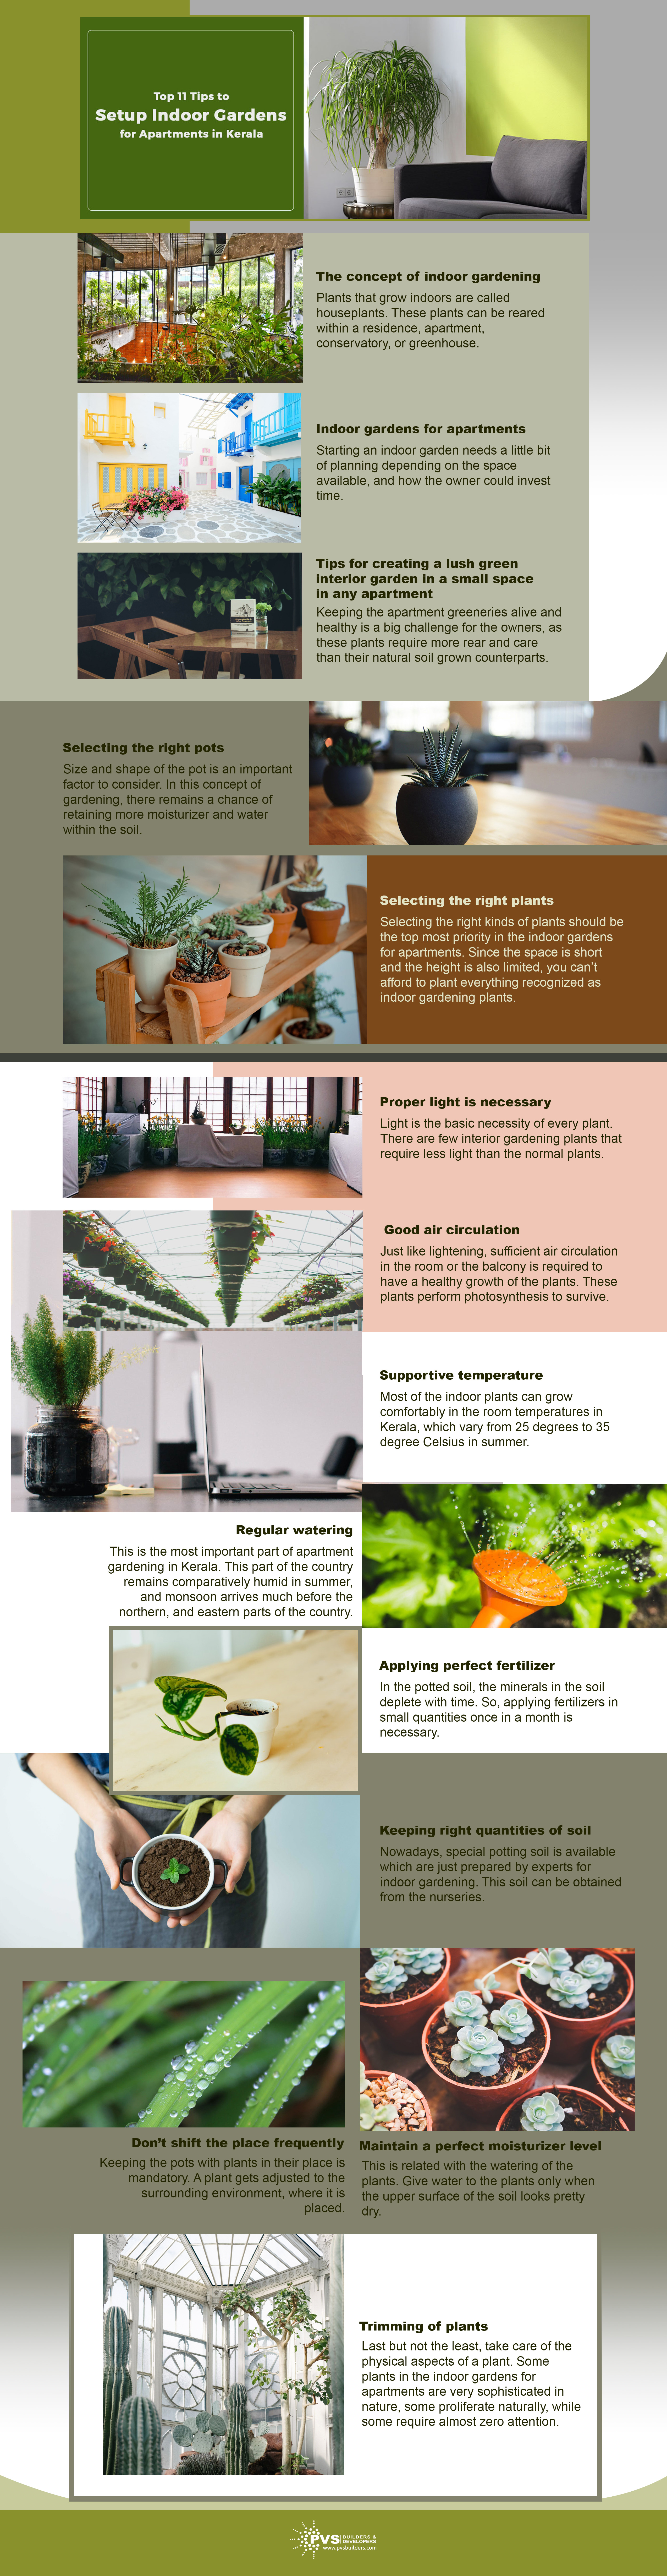 Top Tips To Setup Indoor Gardens For Apartments In Kerala